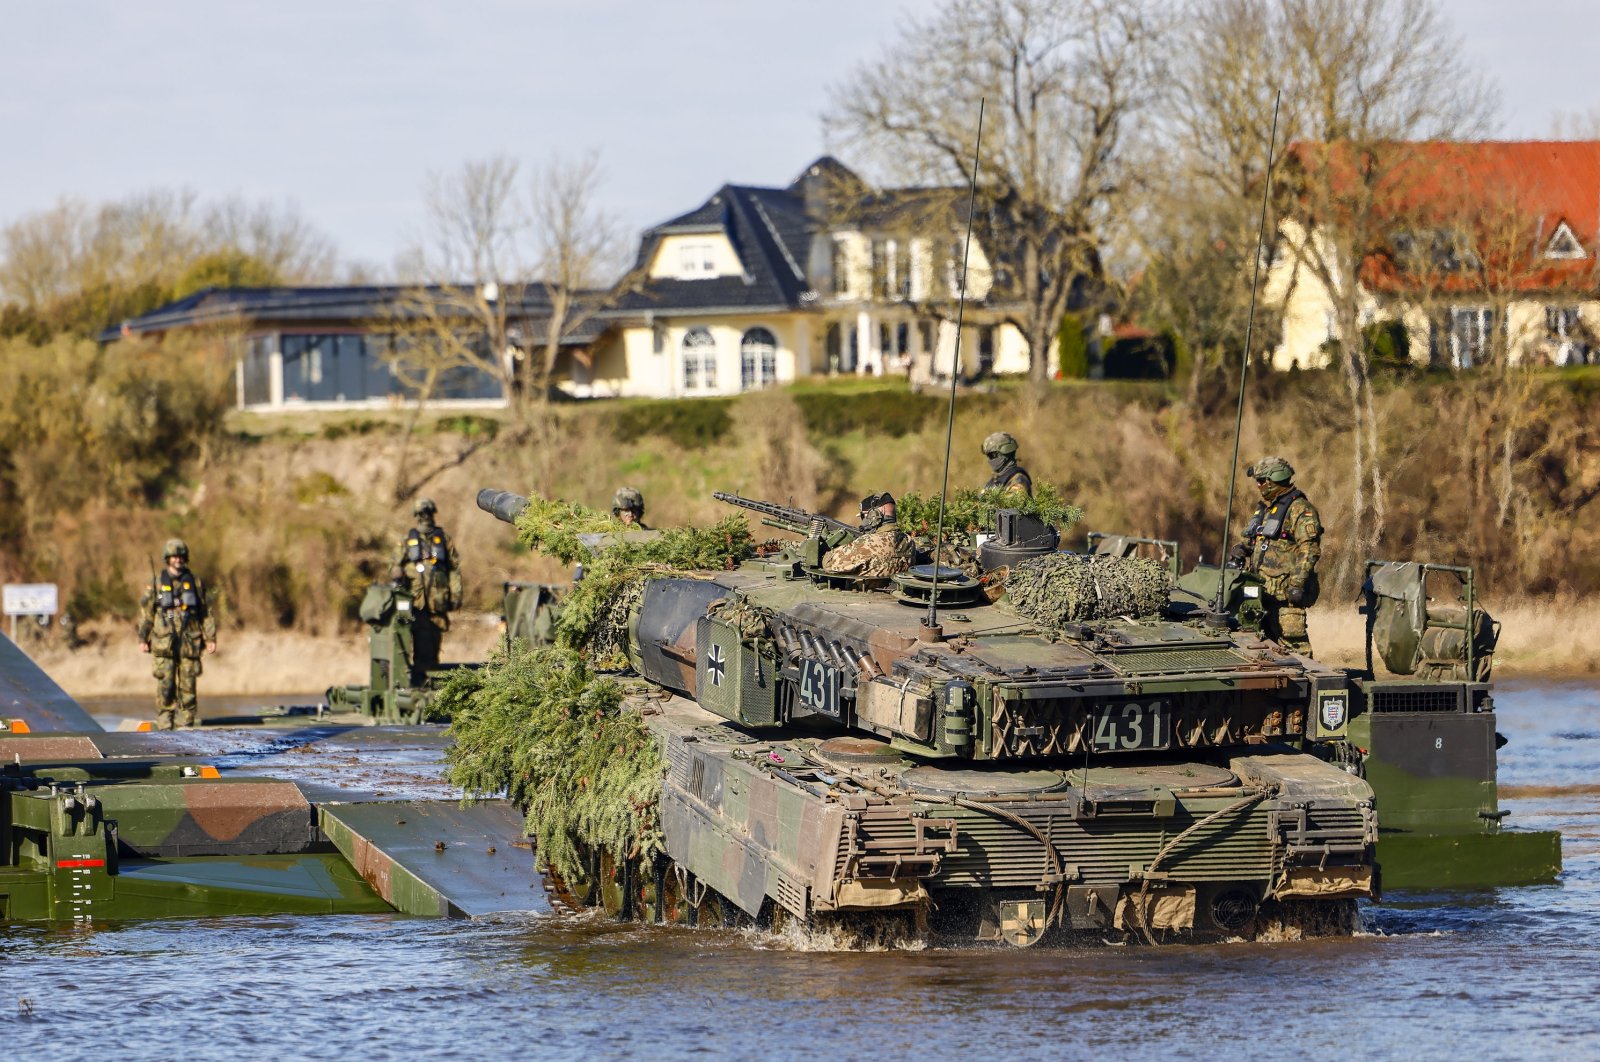 A Leopard 2 A7 main battle tank participates in a water crossing military exercise of an armored infantry brigade of the German armed forces &quot;Bundeswehr,&quot; in Klietz, Germany, March 18, 2024. (EPA Photo)